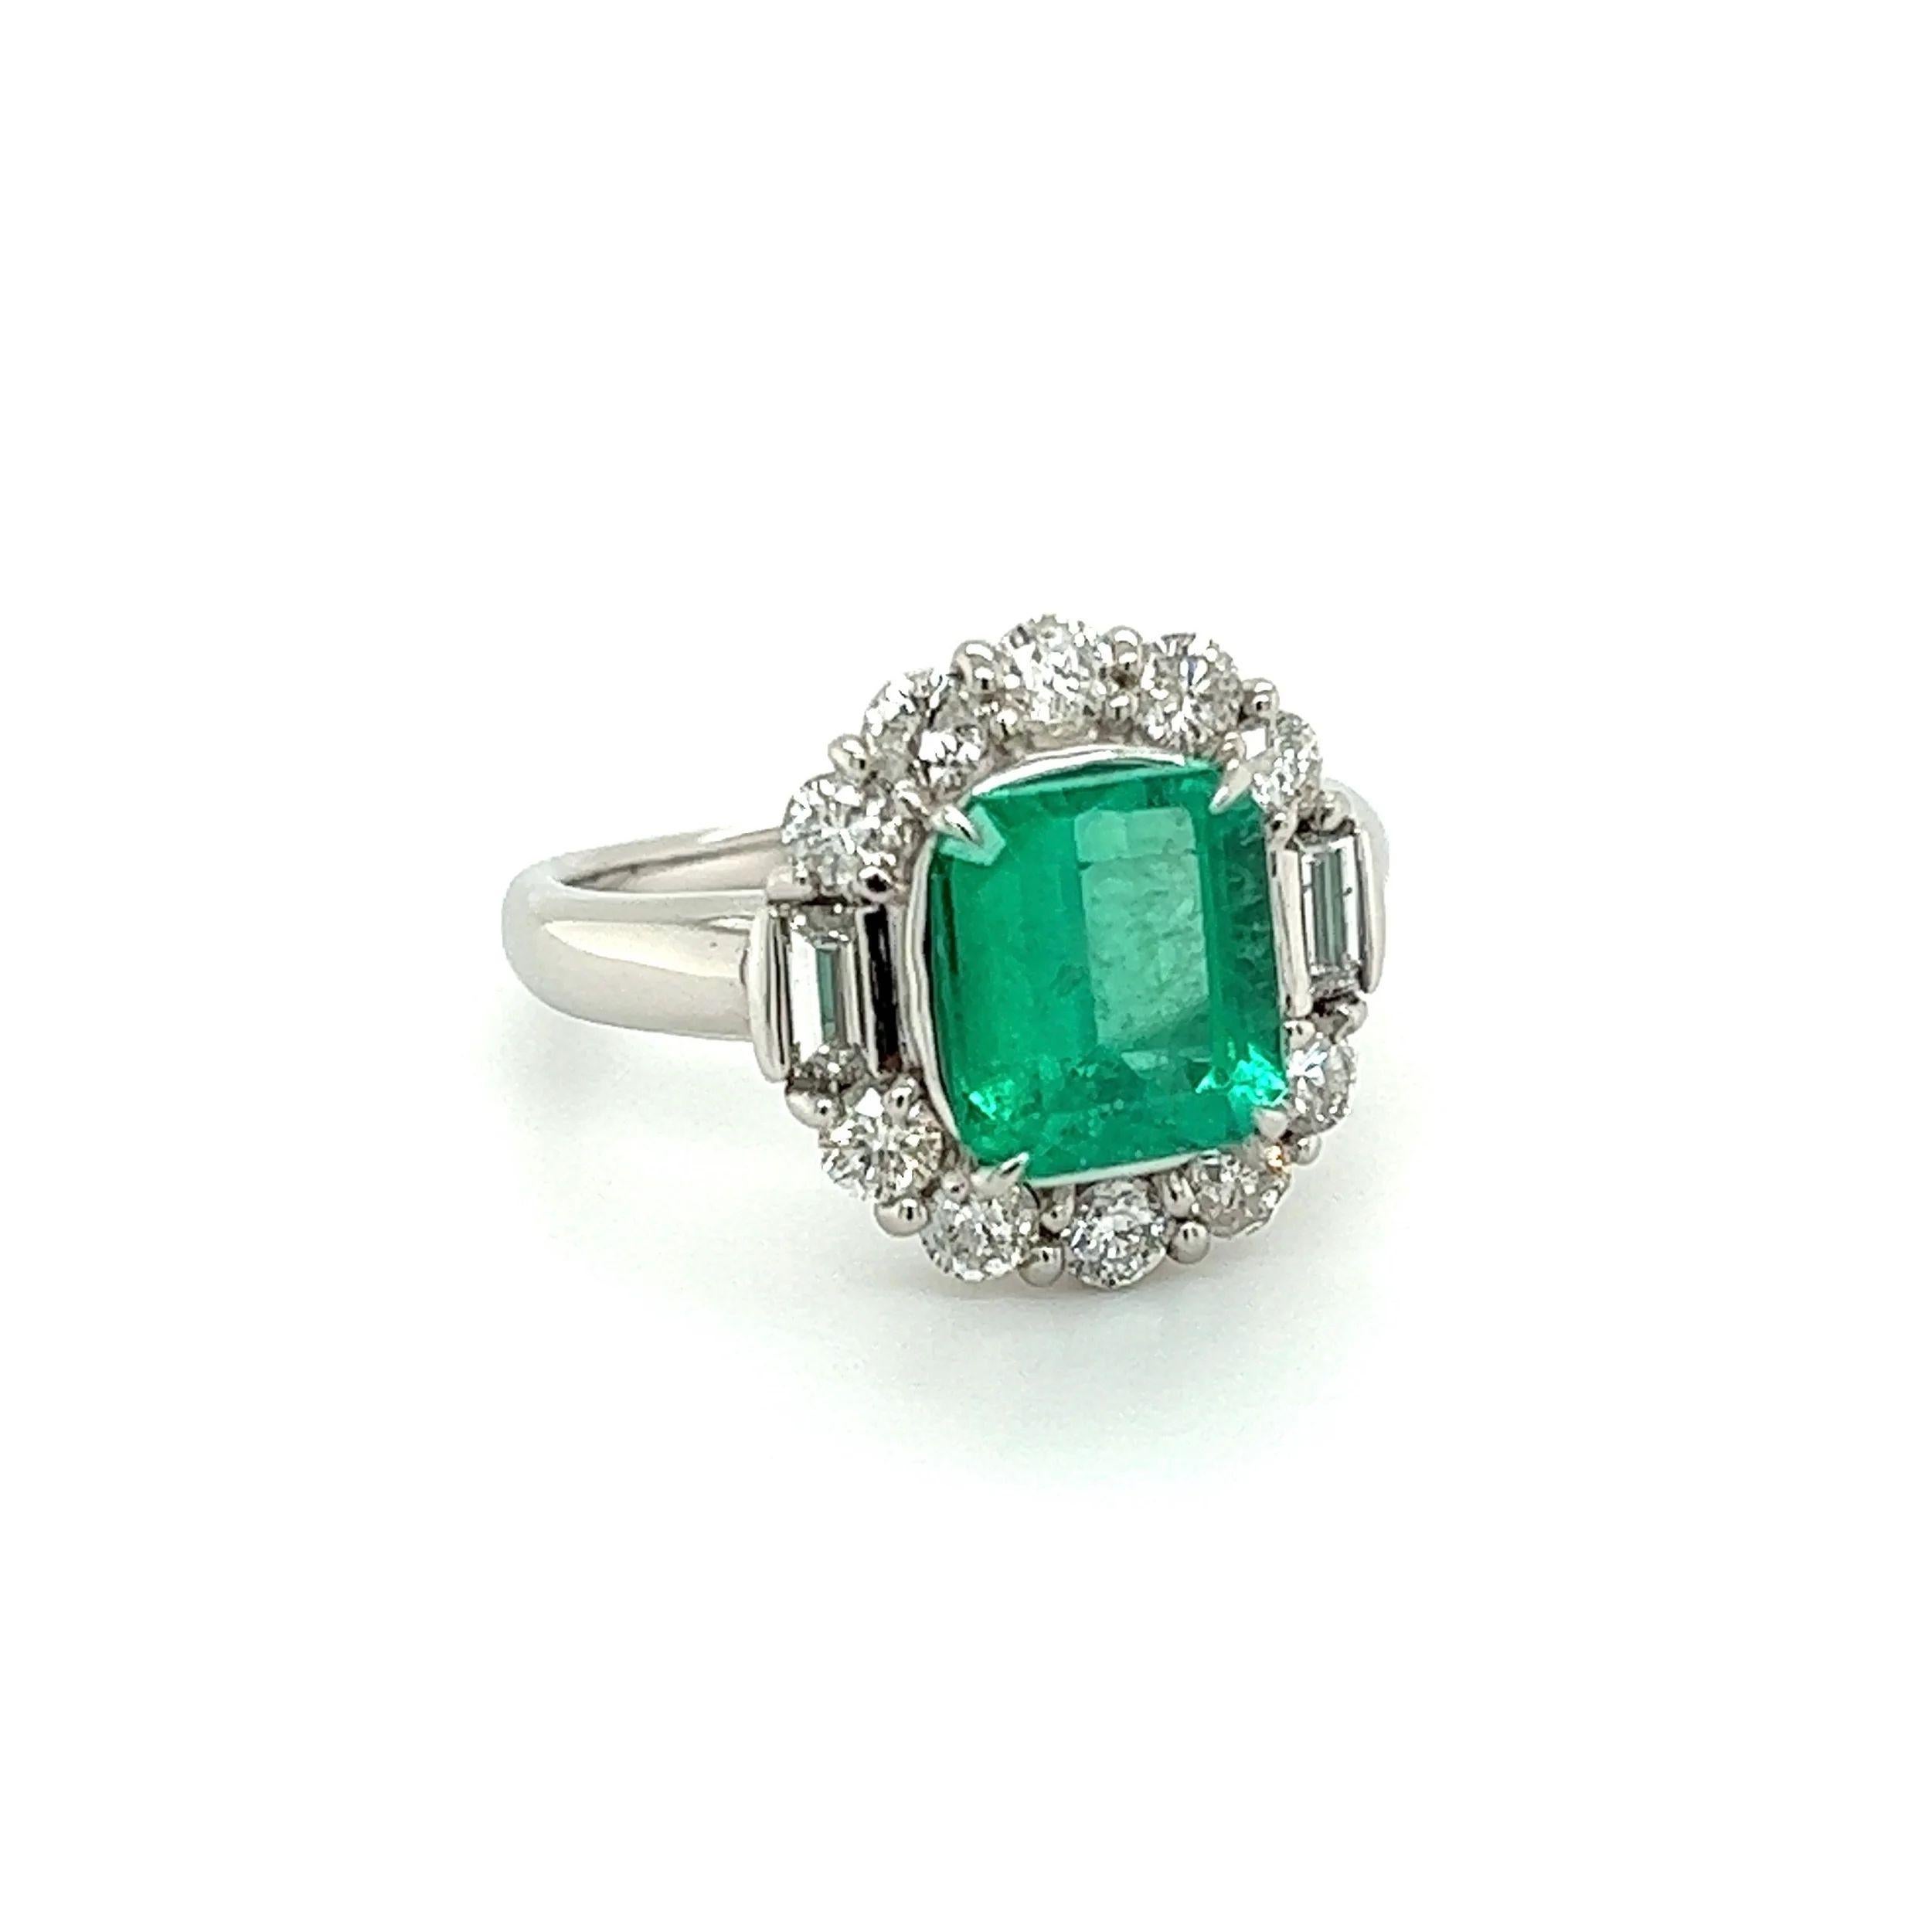 Simply Beautiful! Finely detailed Emerald and Diamond Platinum Cocktail Ring. Centering a securely nestled 2.09 Carat Emerald Cut Colombian Emerald. Surrounded by Baguette and Round Diamonds, weighing approx. 0.90tcw. Hand crafted in Platinum. Ring